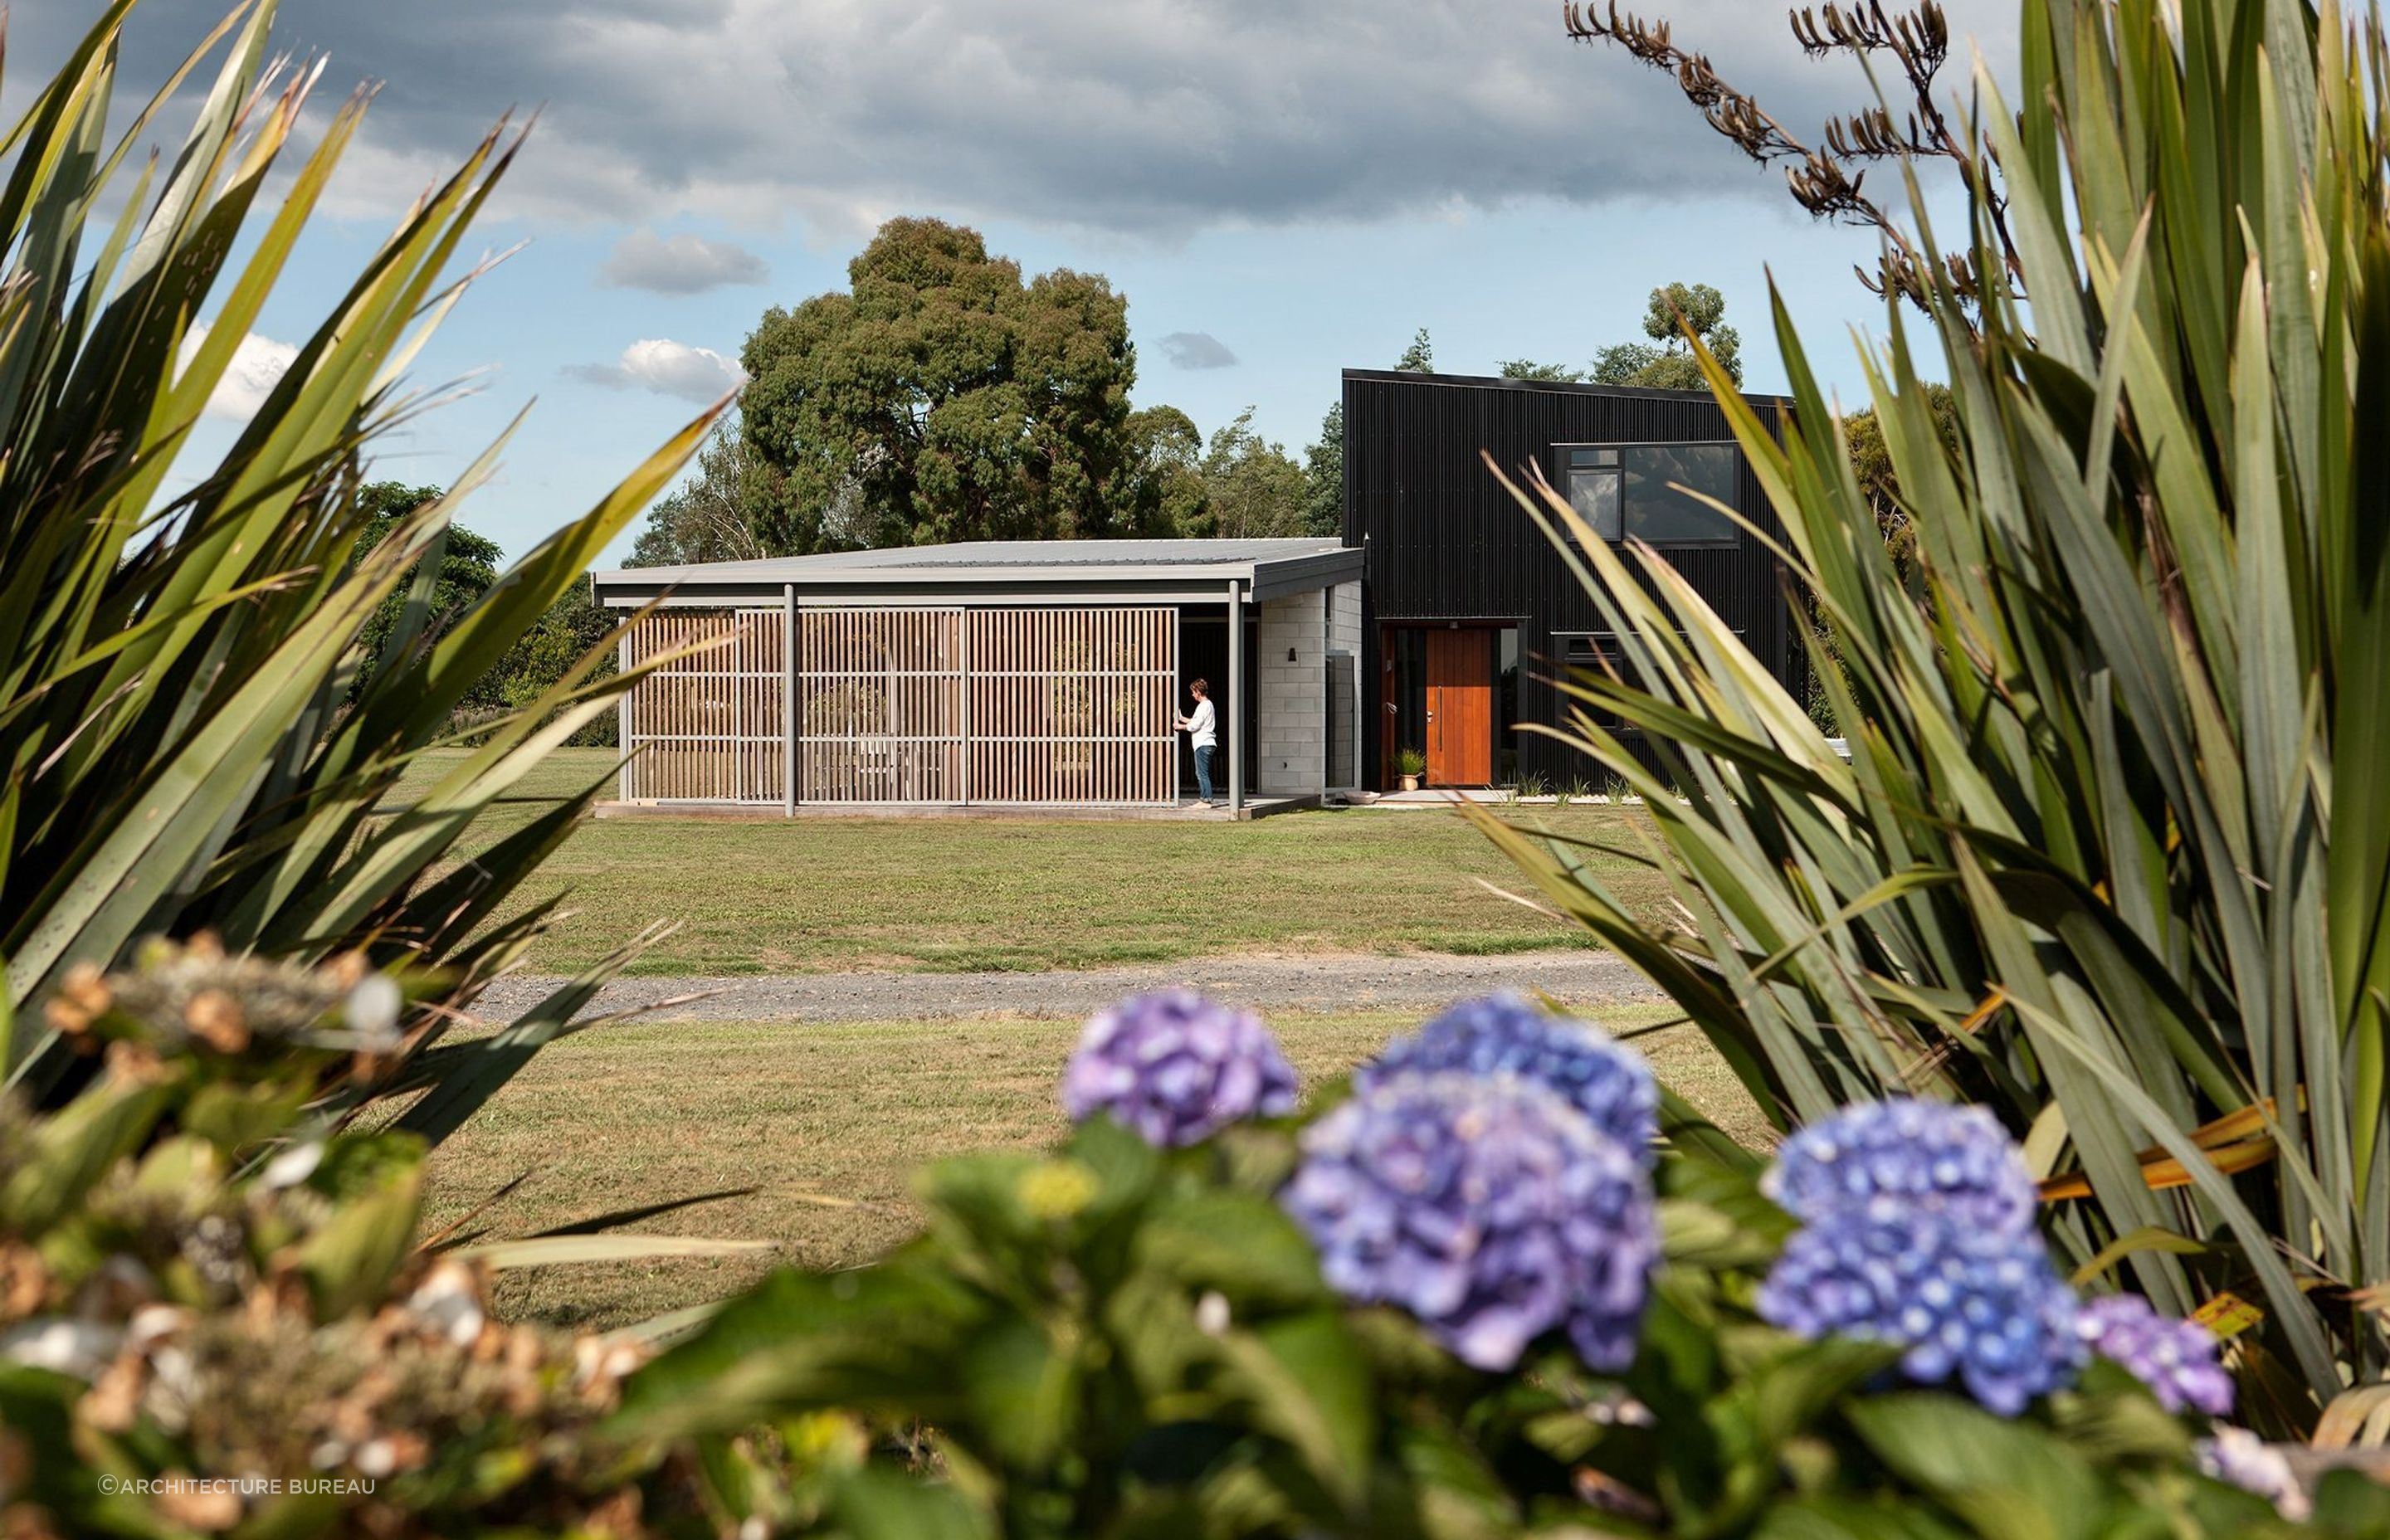 Contemporary home designs, like this in the Waikato, take our expectations to new places.